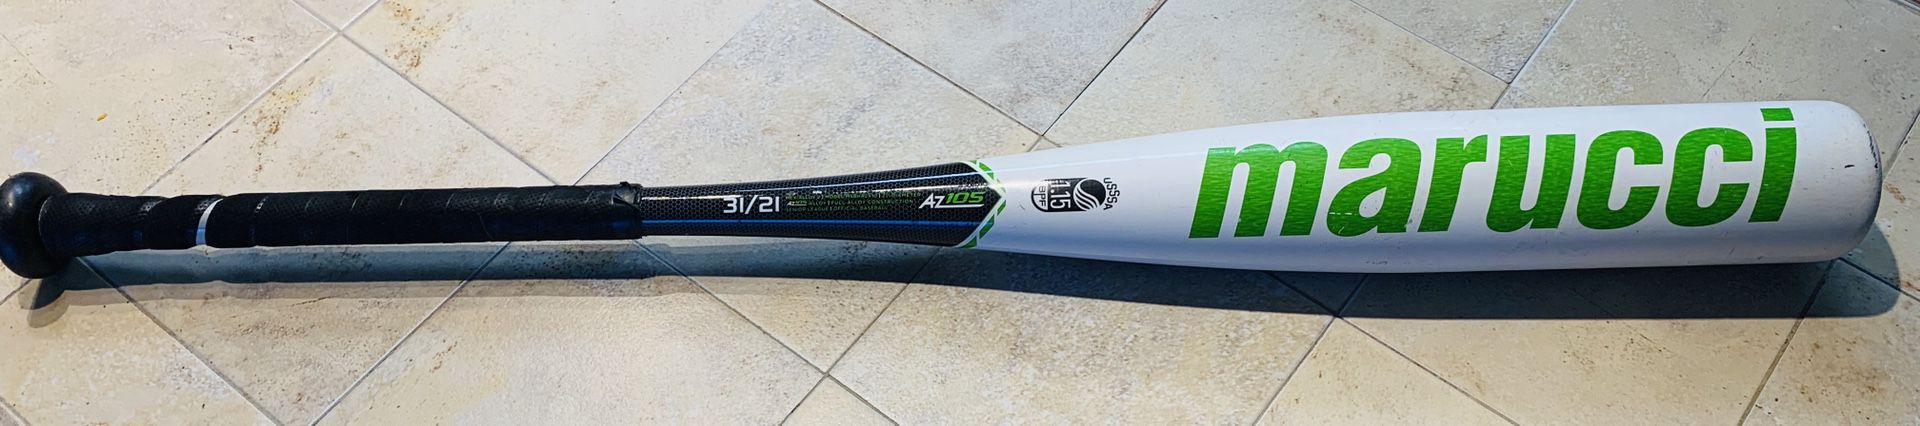 MARRUCCI HEX ALLOY 2 BASEBALL BAT FULL ALLOY USSSA APPROVED 31/21 2 3/4 -10 Normal Wear Use